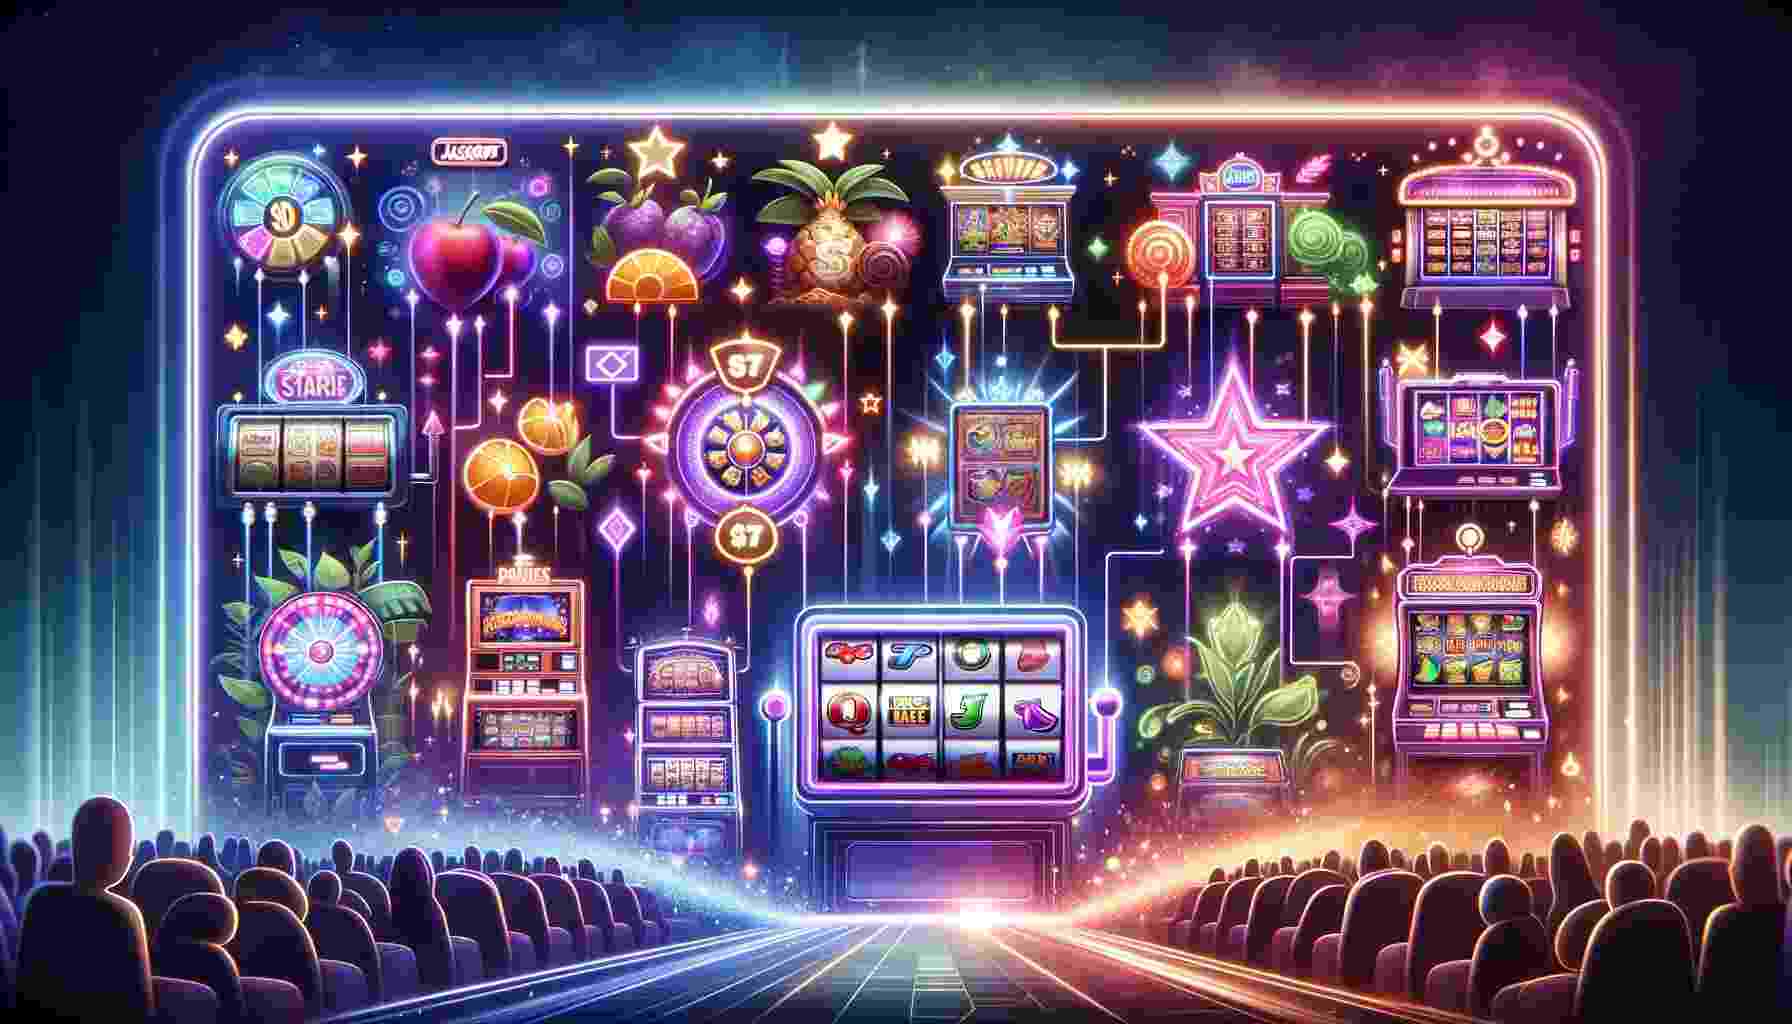 Tips and tricks for choosing the perfect online slot machine